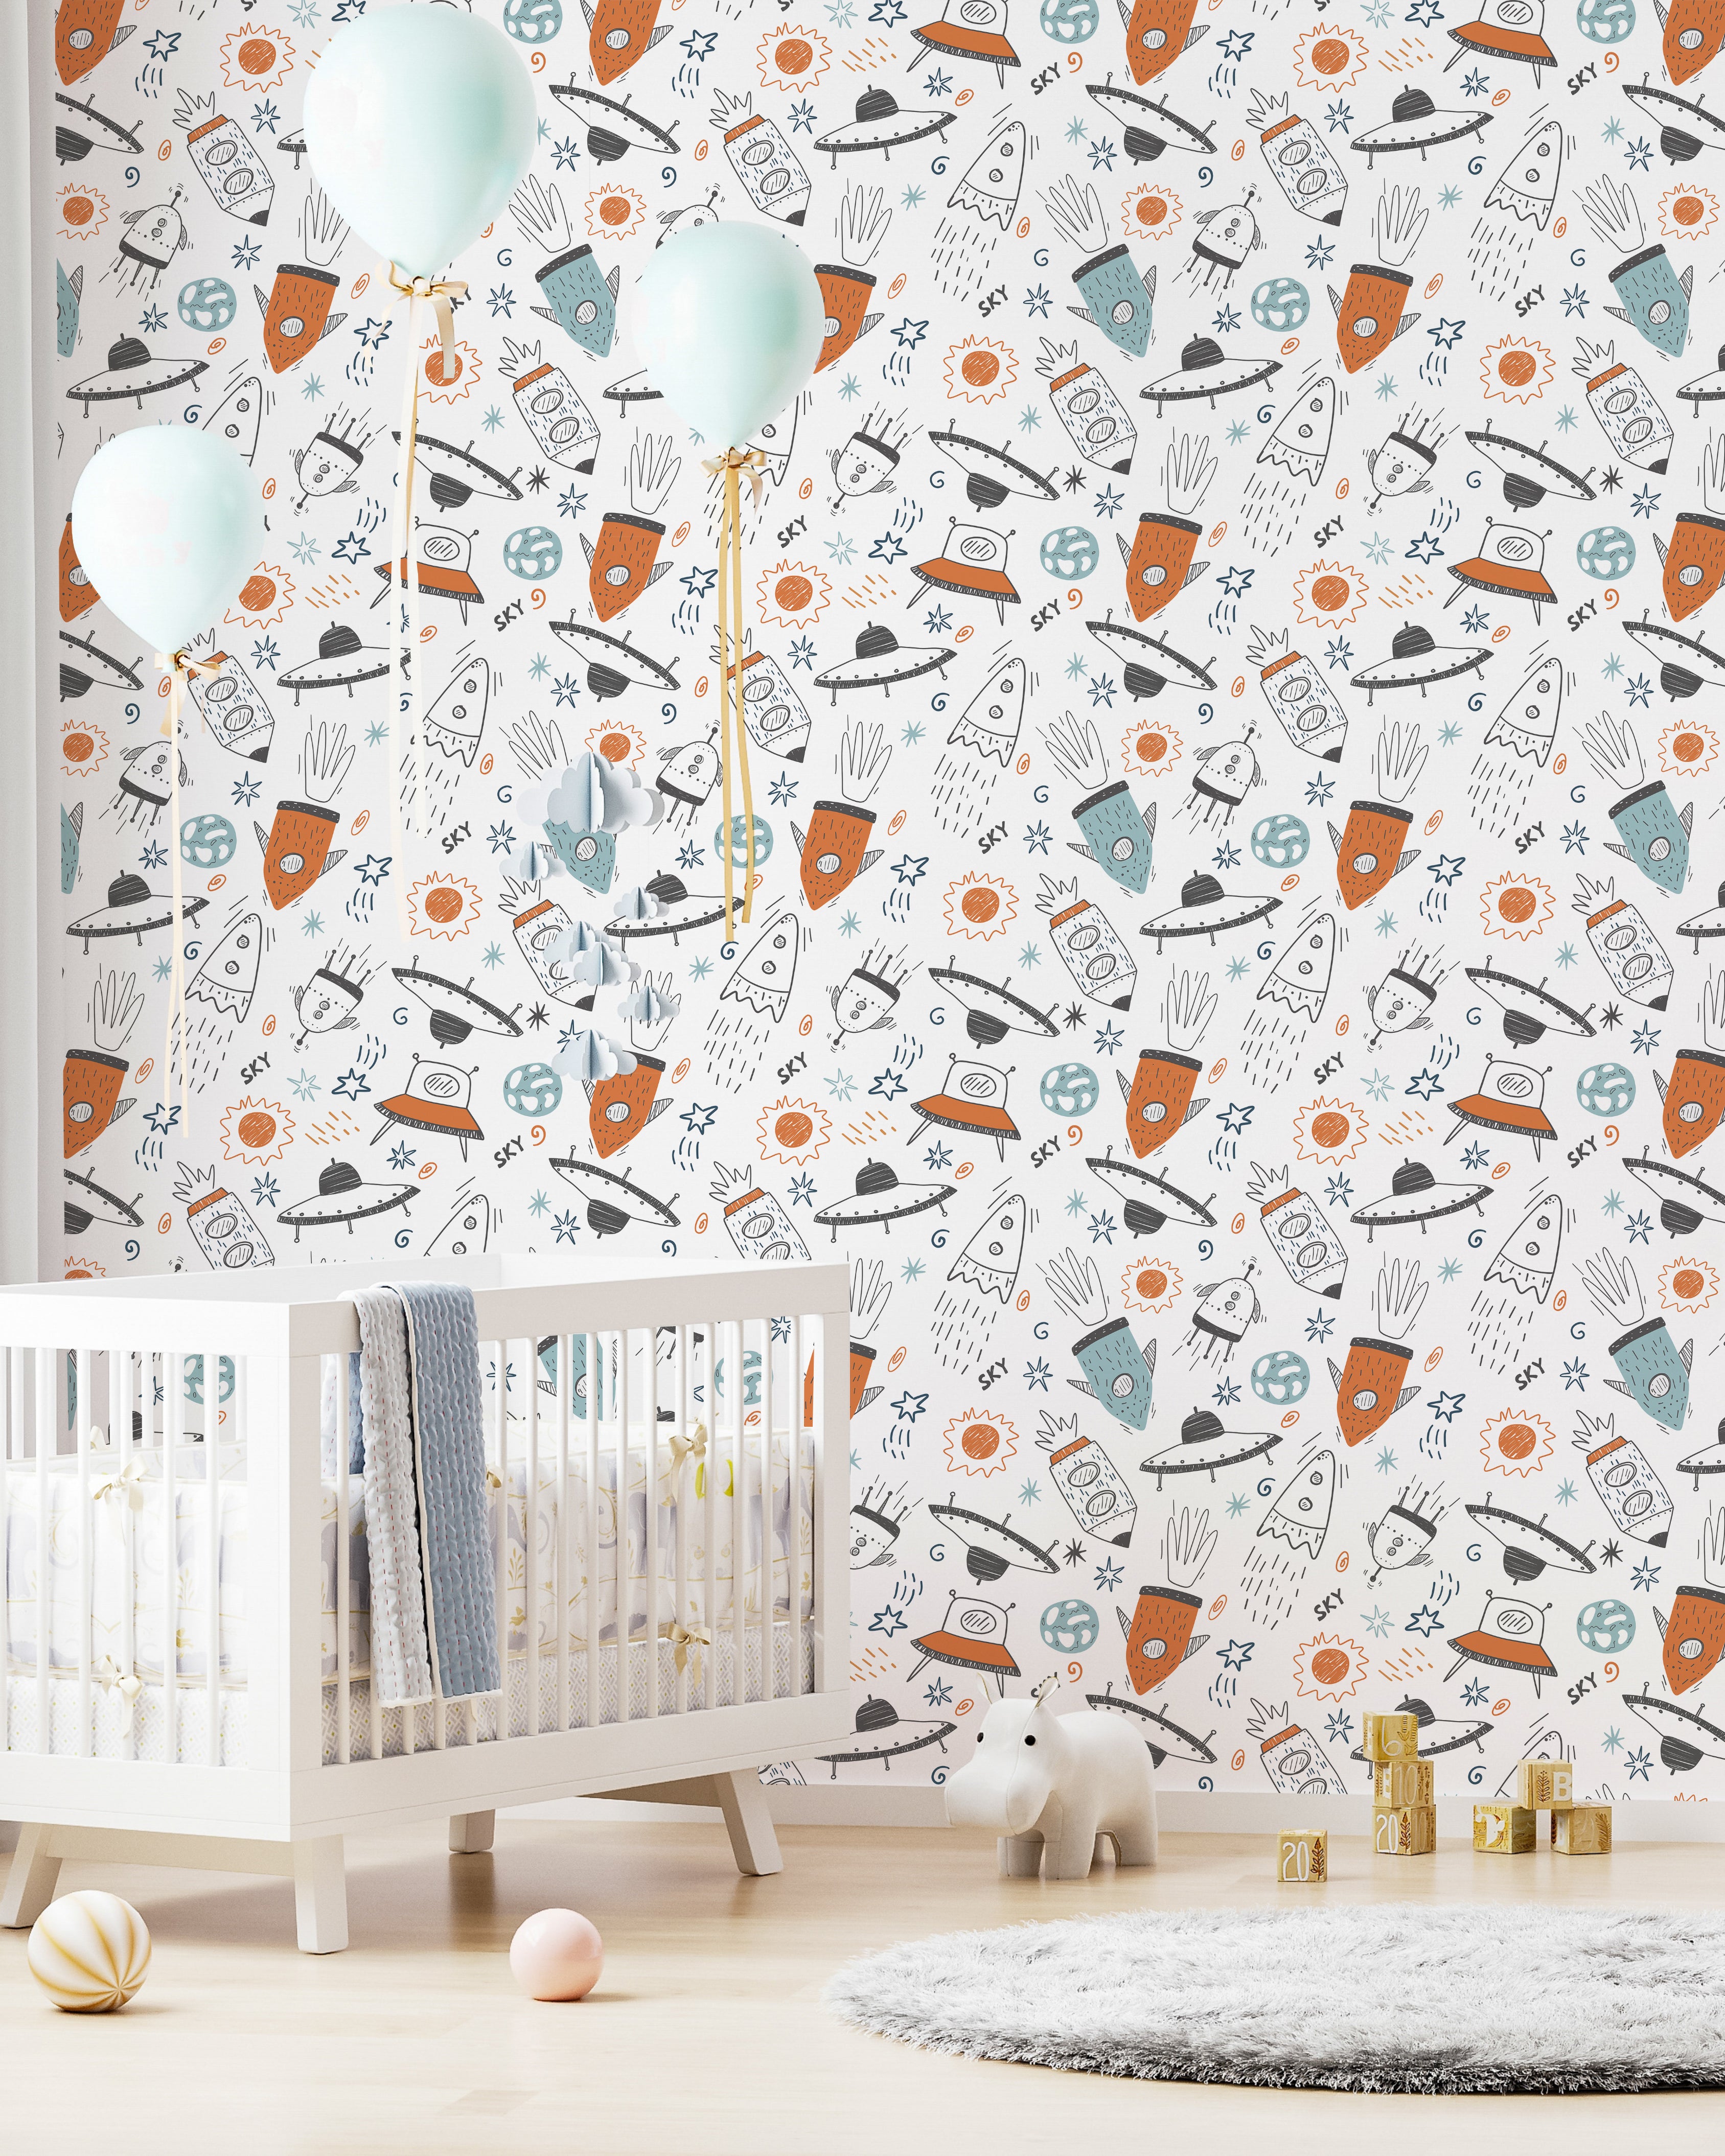 A nursery room with walls covered in space-themed wallpaper showcasing a whimsical array of rockets, planets, and stars, accompanied by light blue balloons, a white crib, and a grey carpet